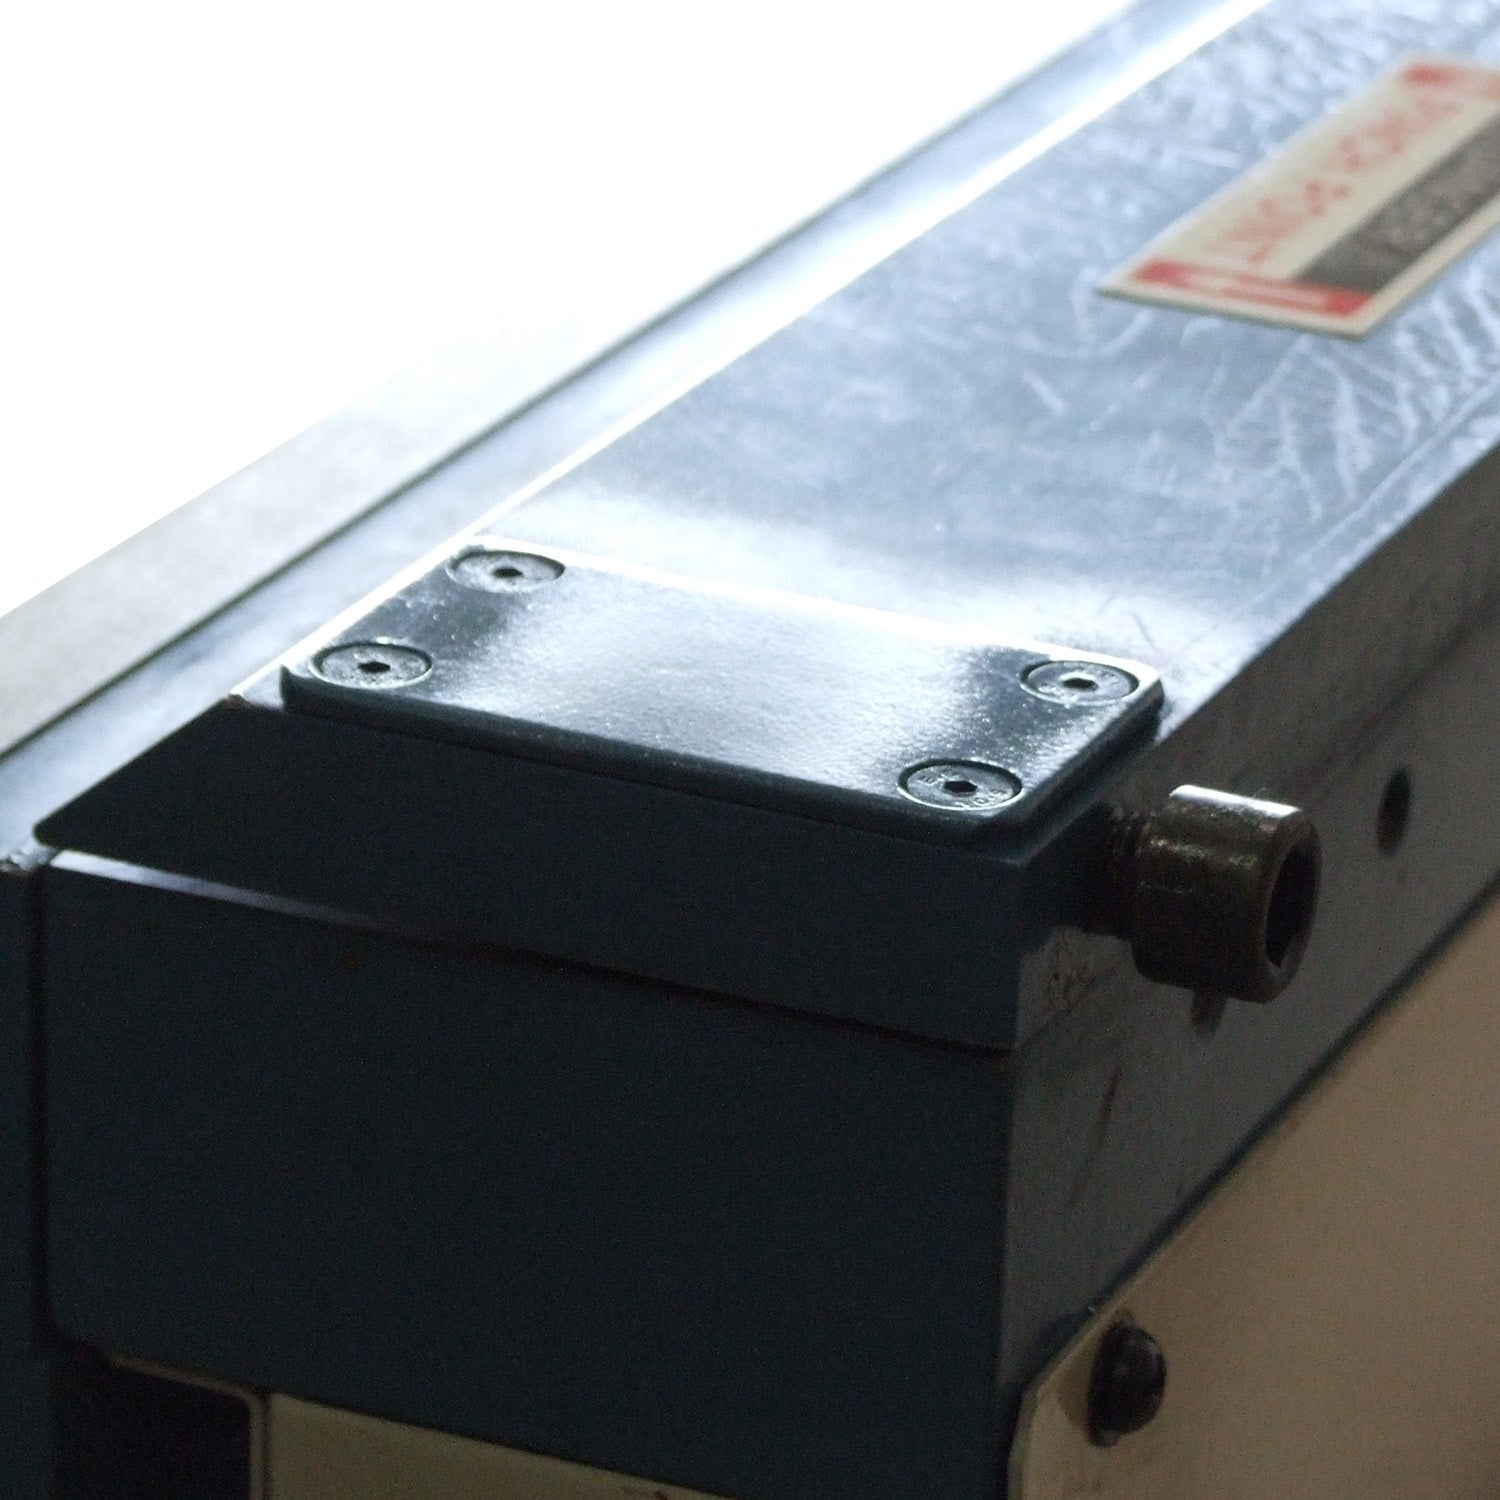 Baileigh BB-9616M 220V(+/- 5 percent) 1 Phase Manually Operated Magnetic Sheet Metal Brake, 8' Length